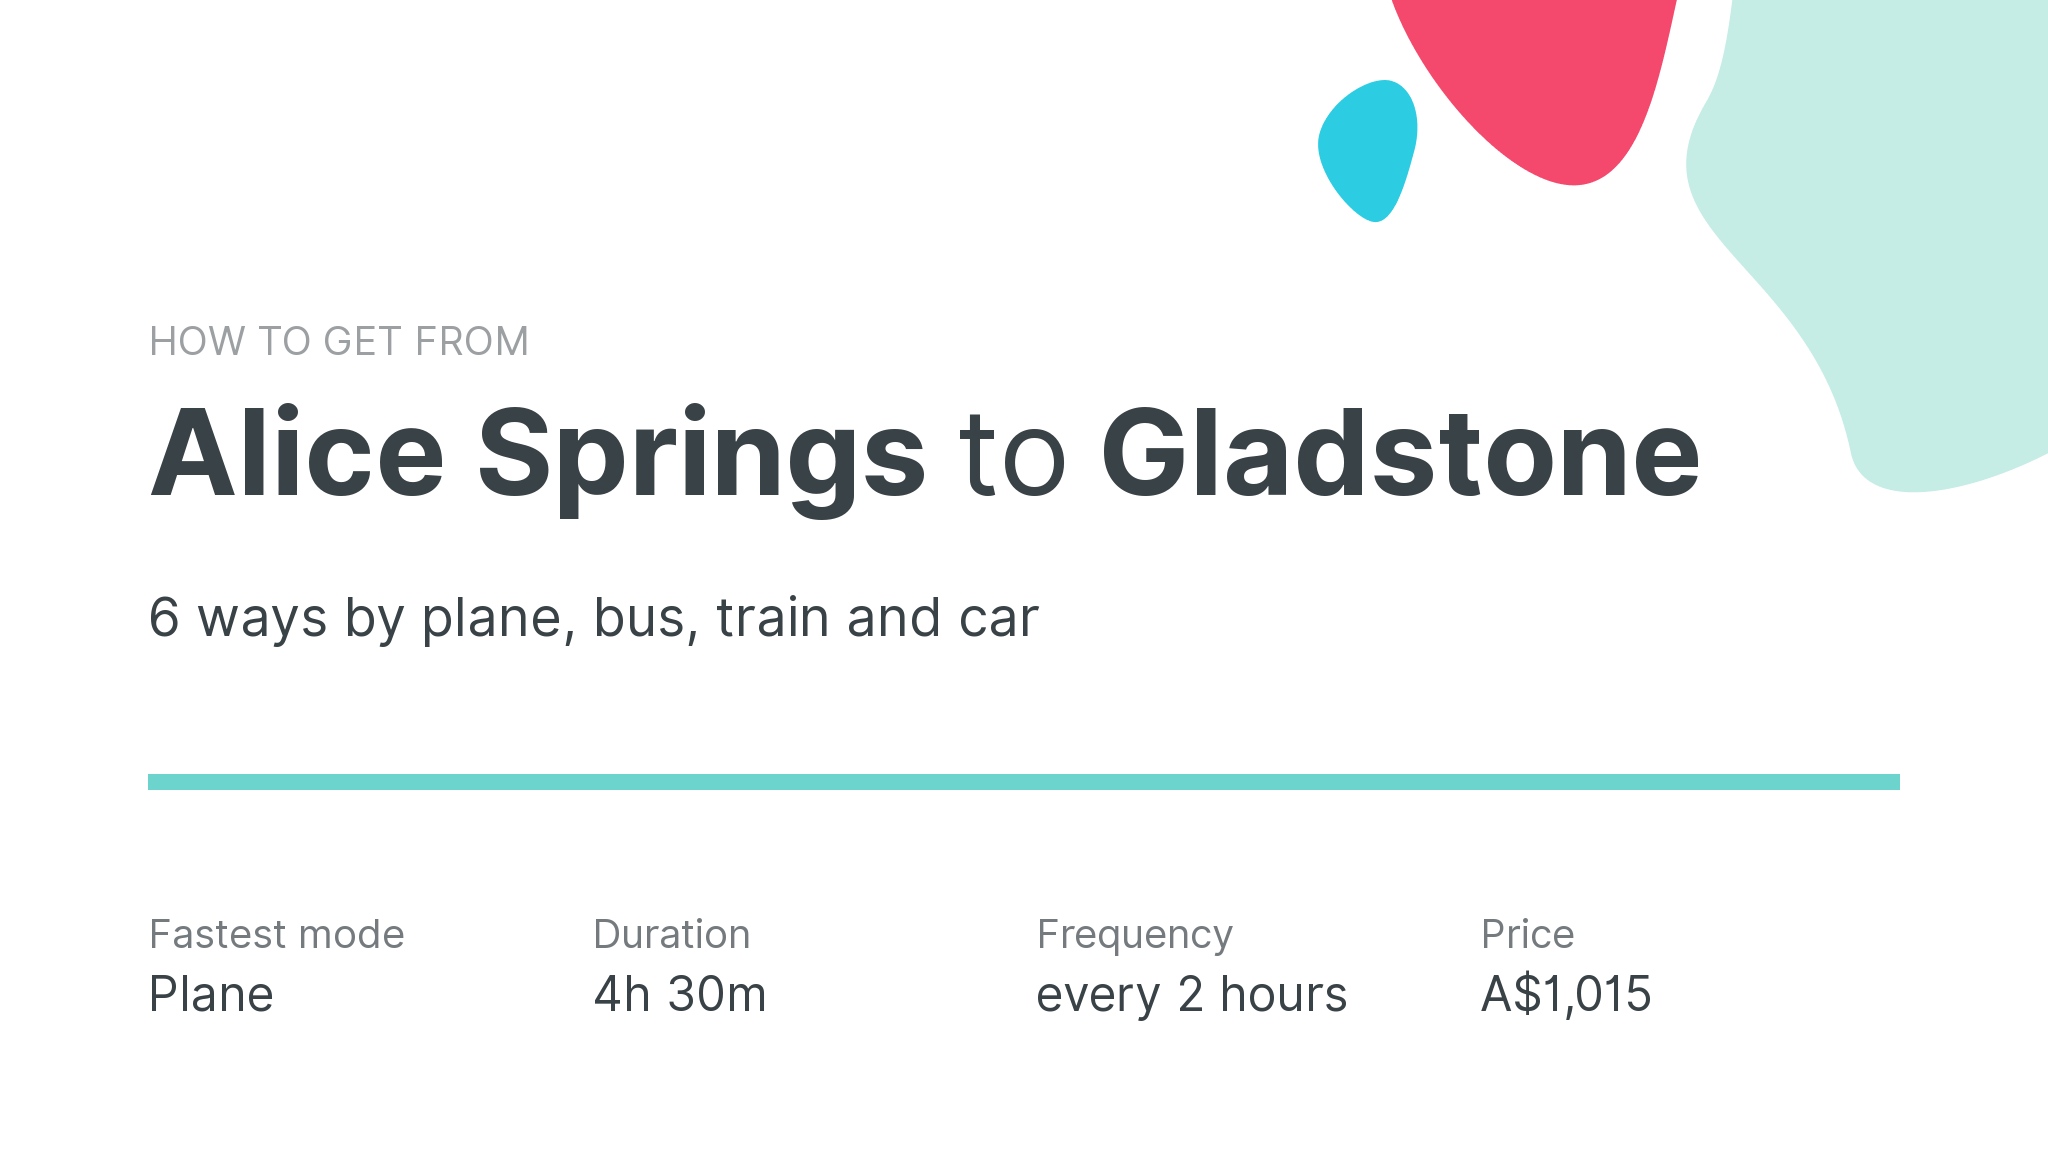 How do I get from Alice Springs to Gladstone